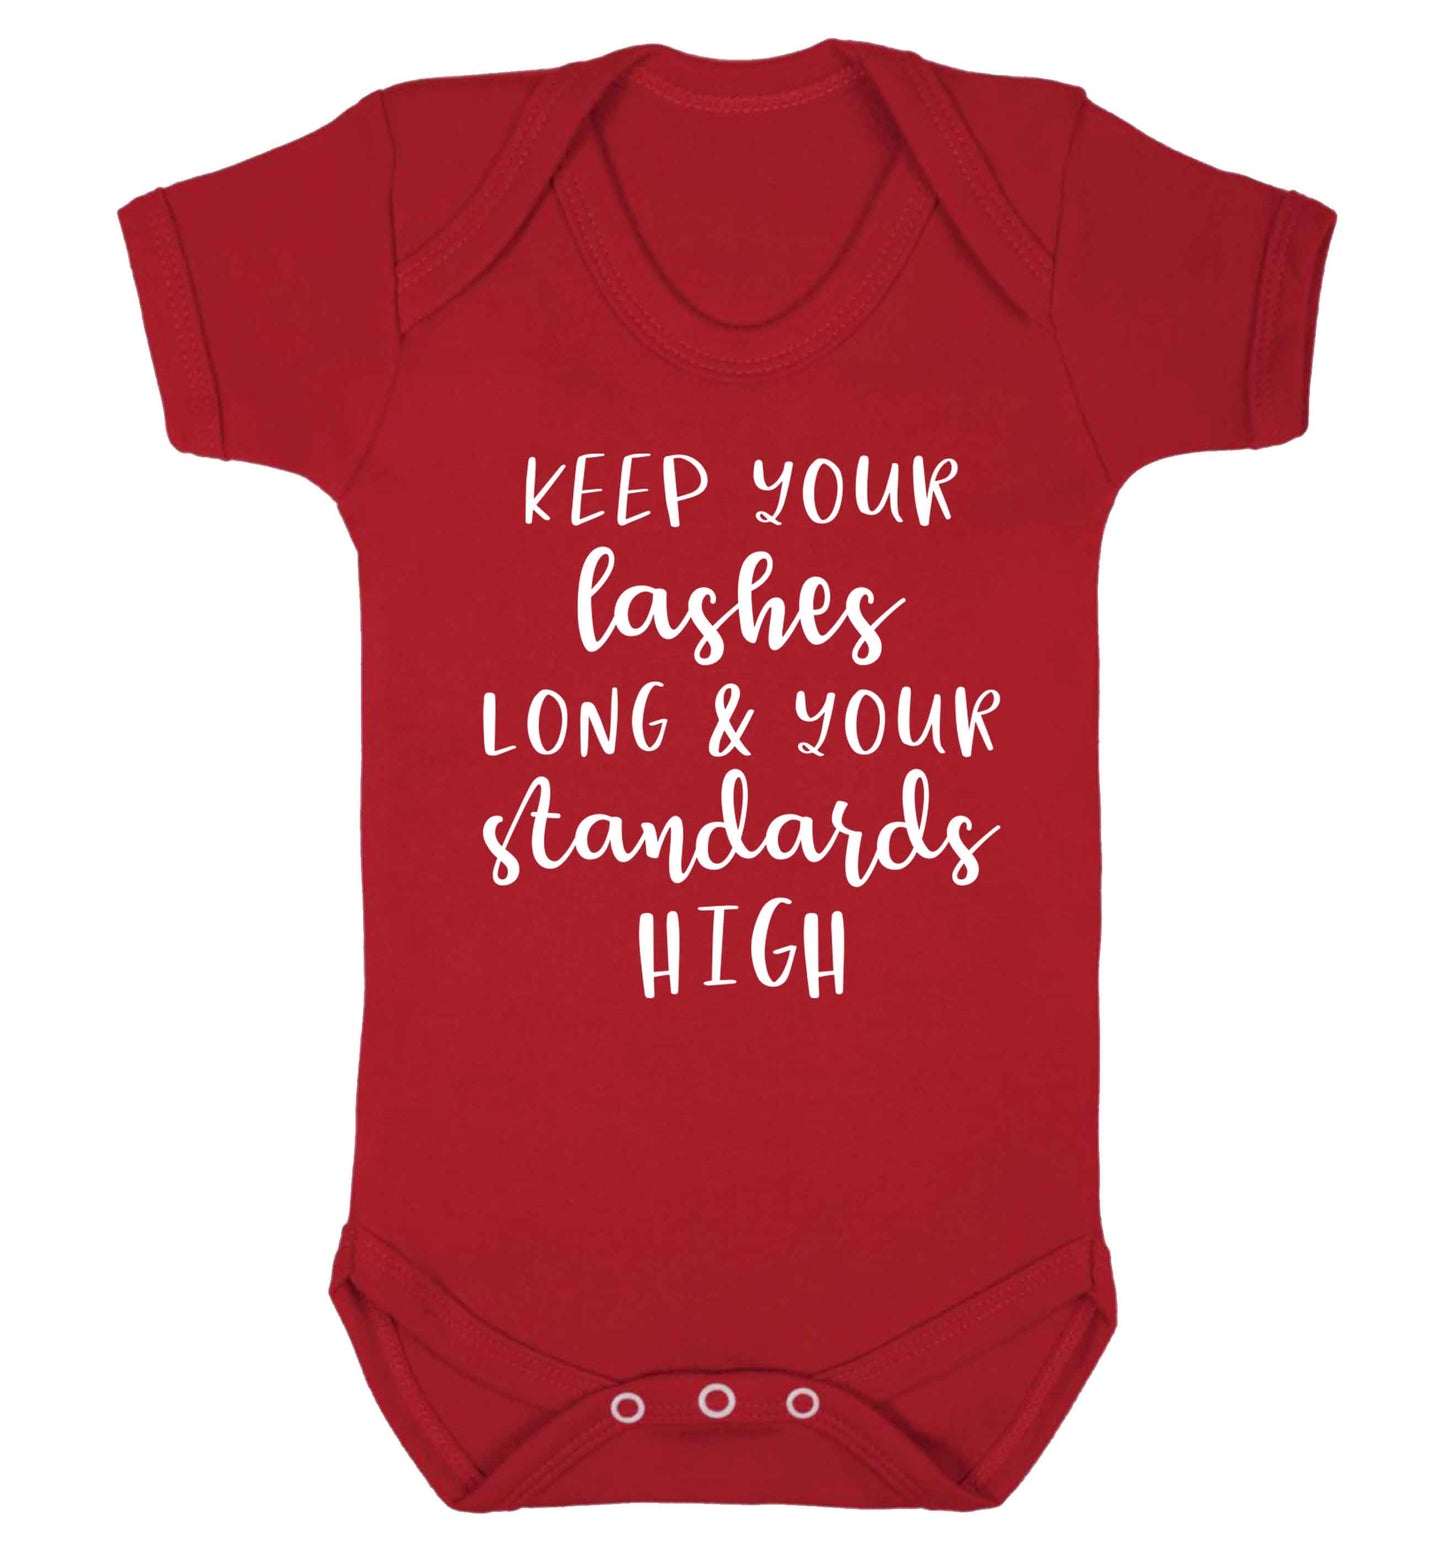 Keep your lashes long and your standards high Baby Vest red 18-24 months